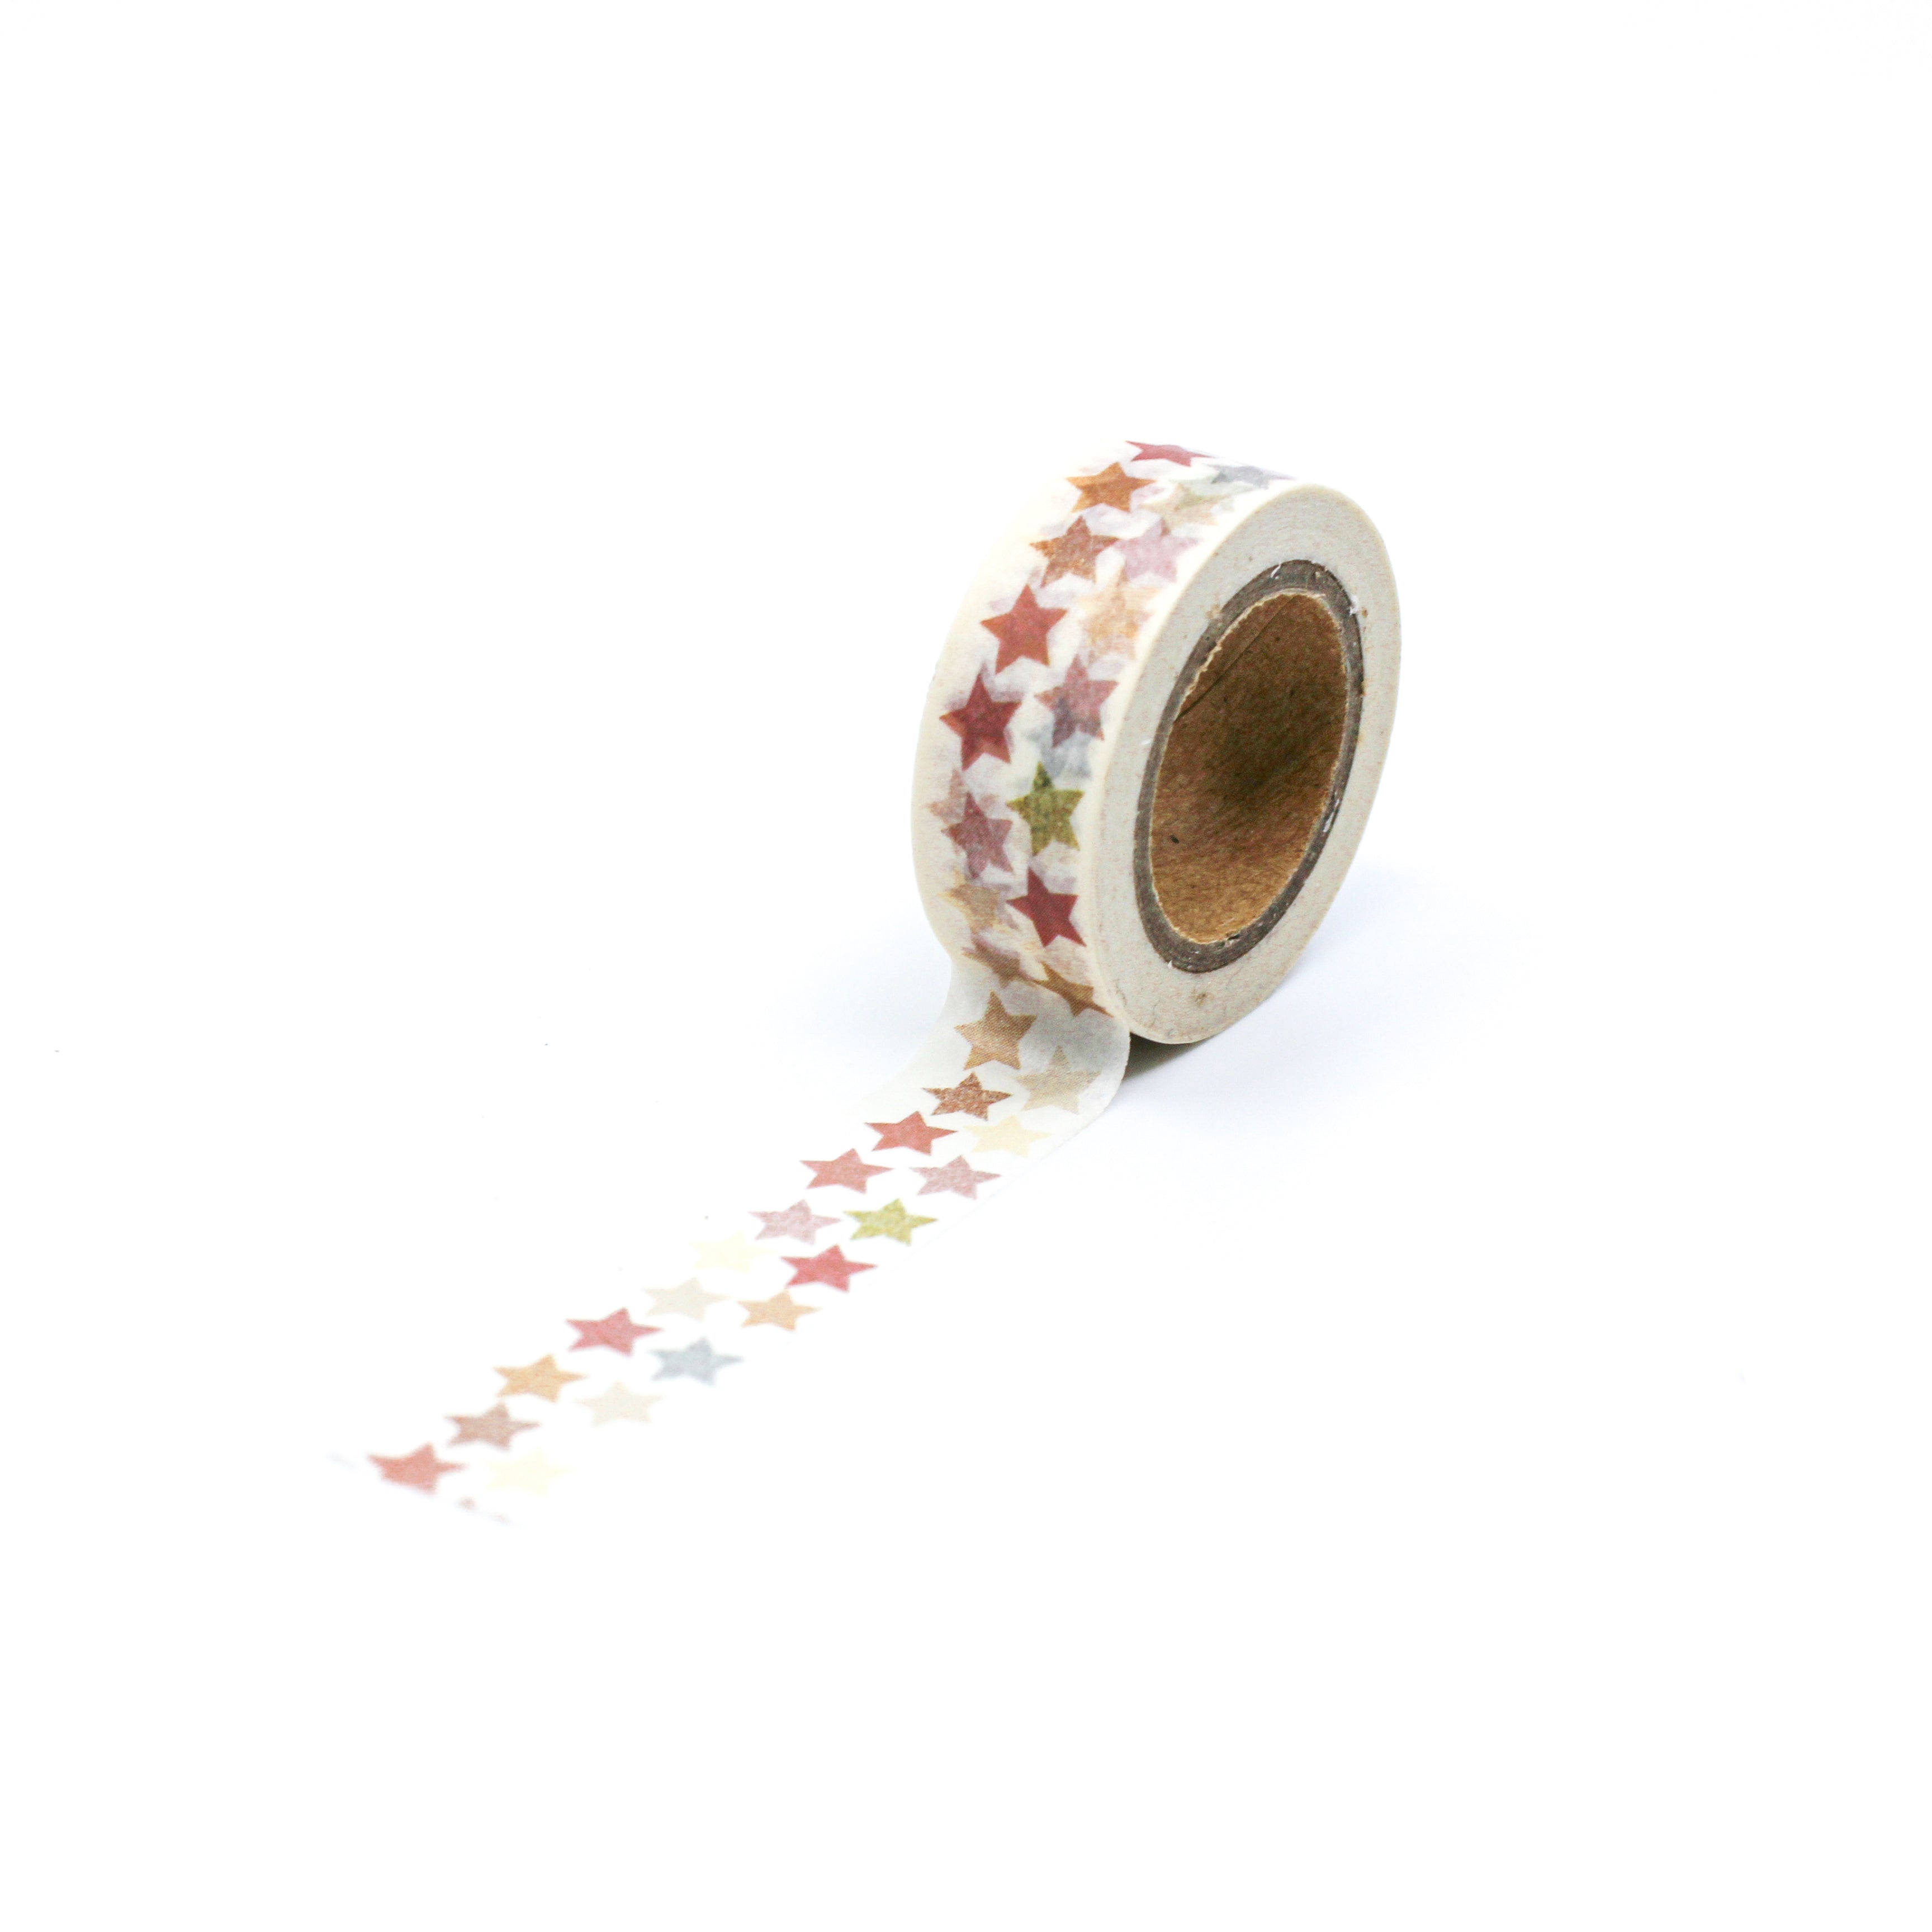 This is a full pattern repeat view of colorful twinkle stars washi tape BBB Supplies Craft Shop